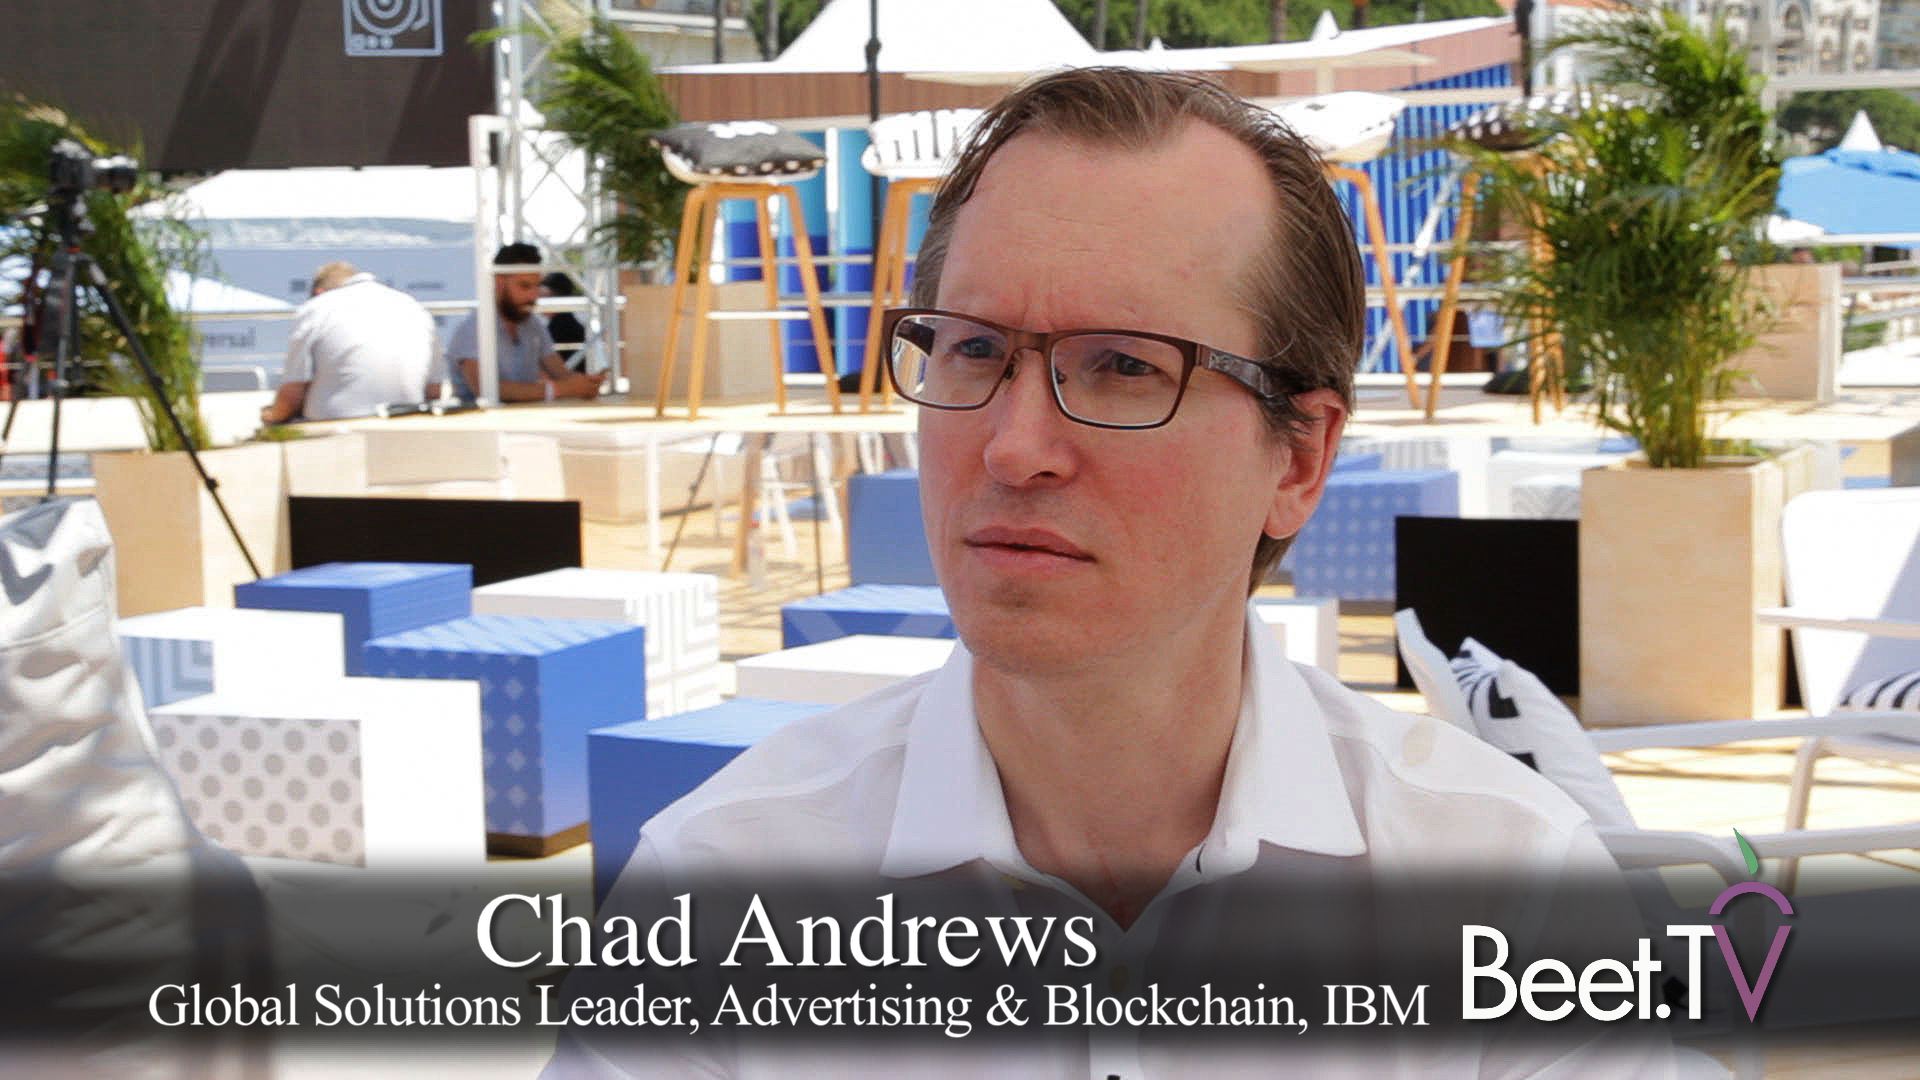 Blockchain Can Shine A Light On Ad Supply Chain: IBM’s Andrews